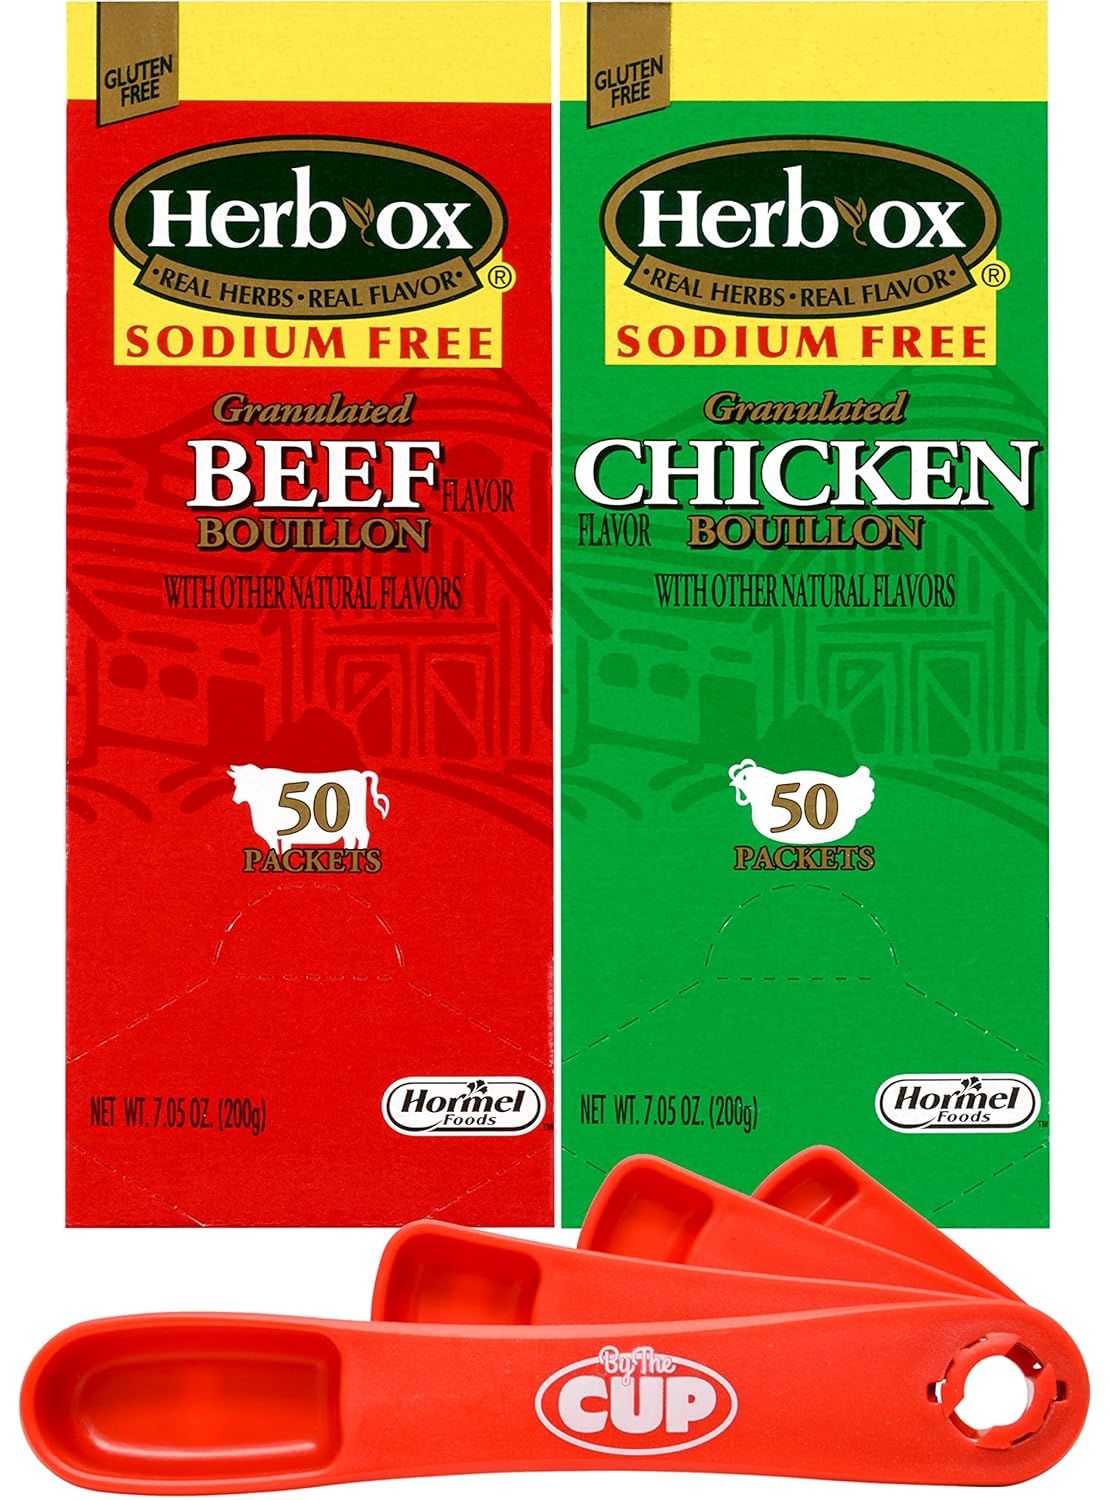 Herb-Ox Sodium Free Bouillon Variety Pack, 50 Count Box (Pack of 2) Granulated Beef and Chicken Bouillon with By The Cup Swivel Spoons